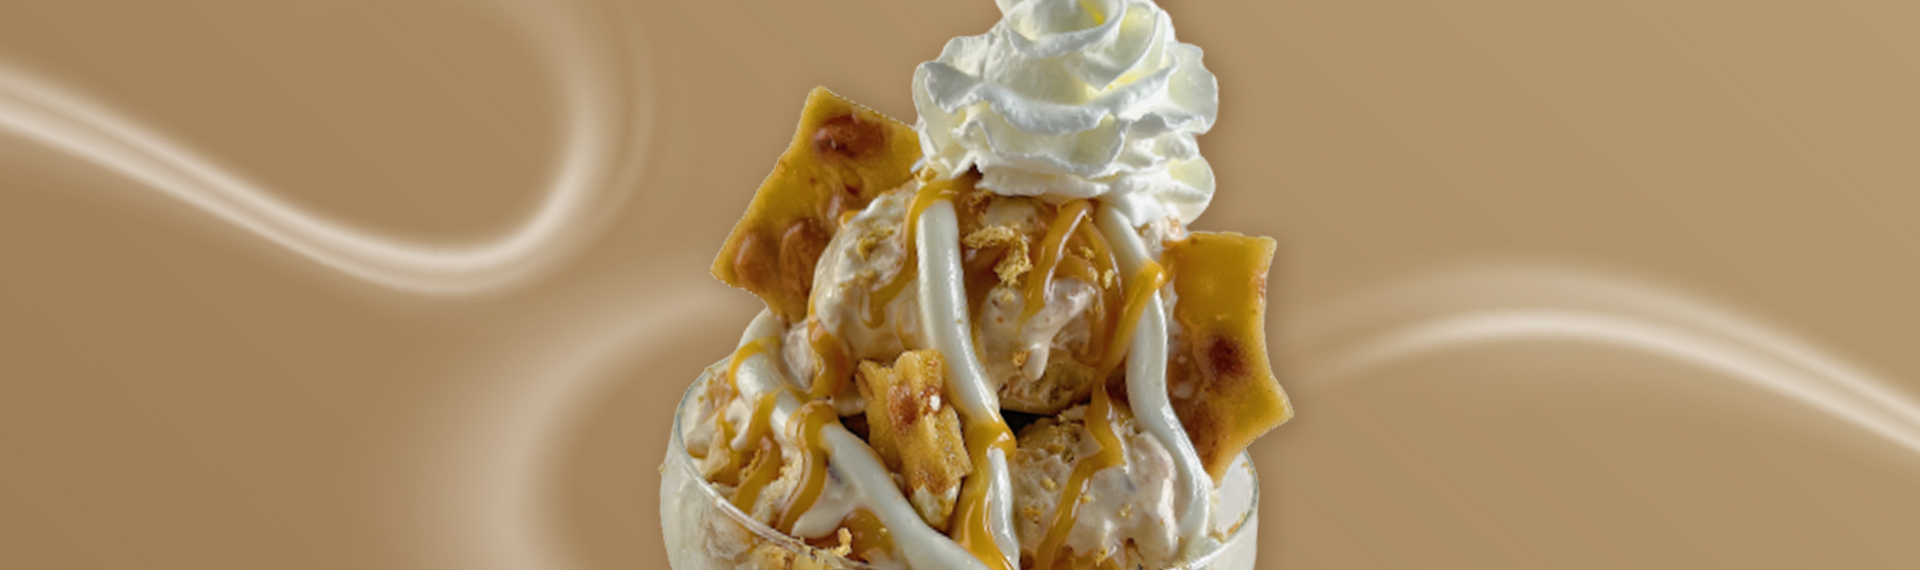 Peanut Butter Brittle Pie Sundae *As seen on Saturday Night Live May 7, 2022.